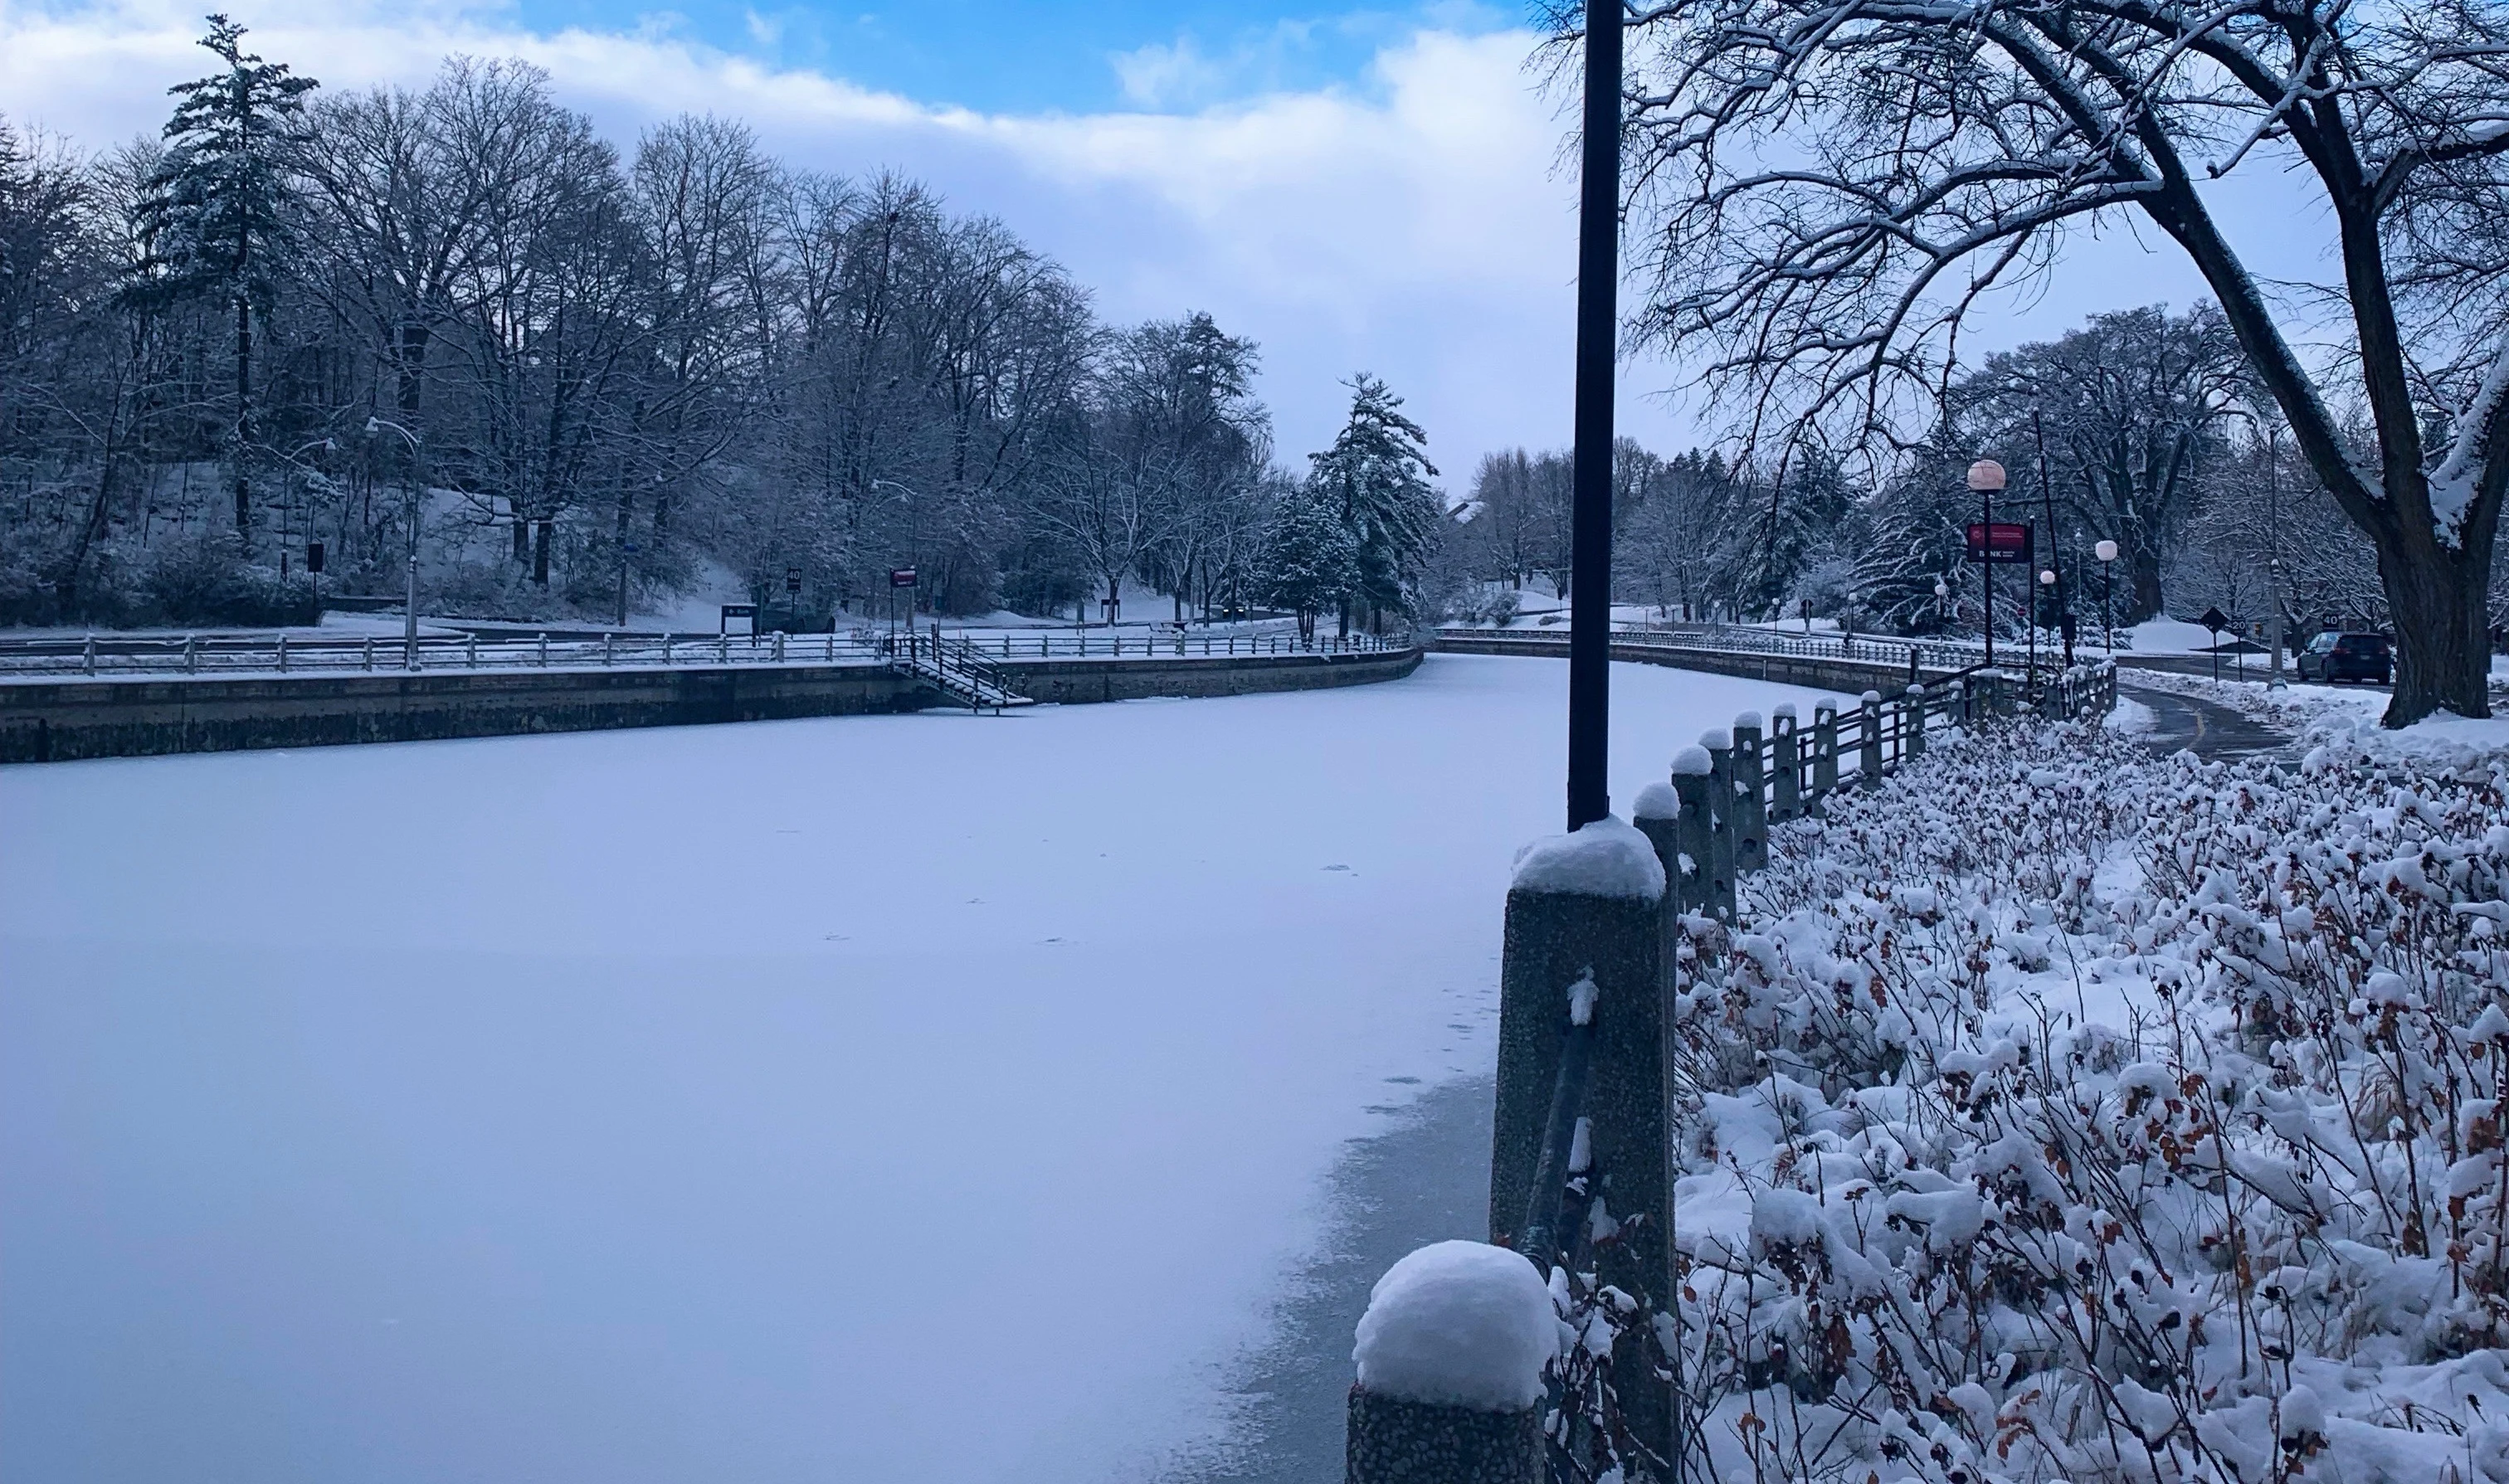 Snowstorms complicate hopes for Rideau Canal skating season